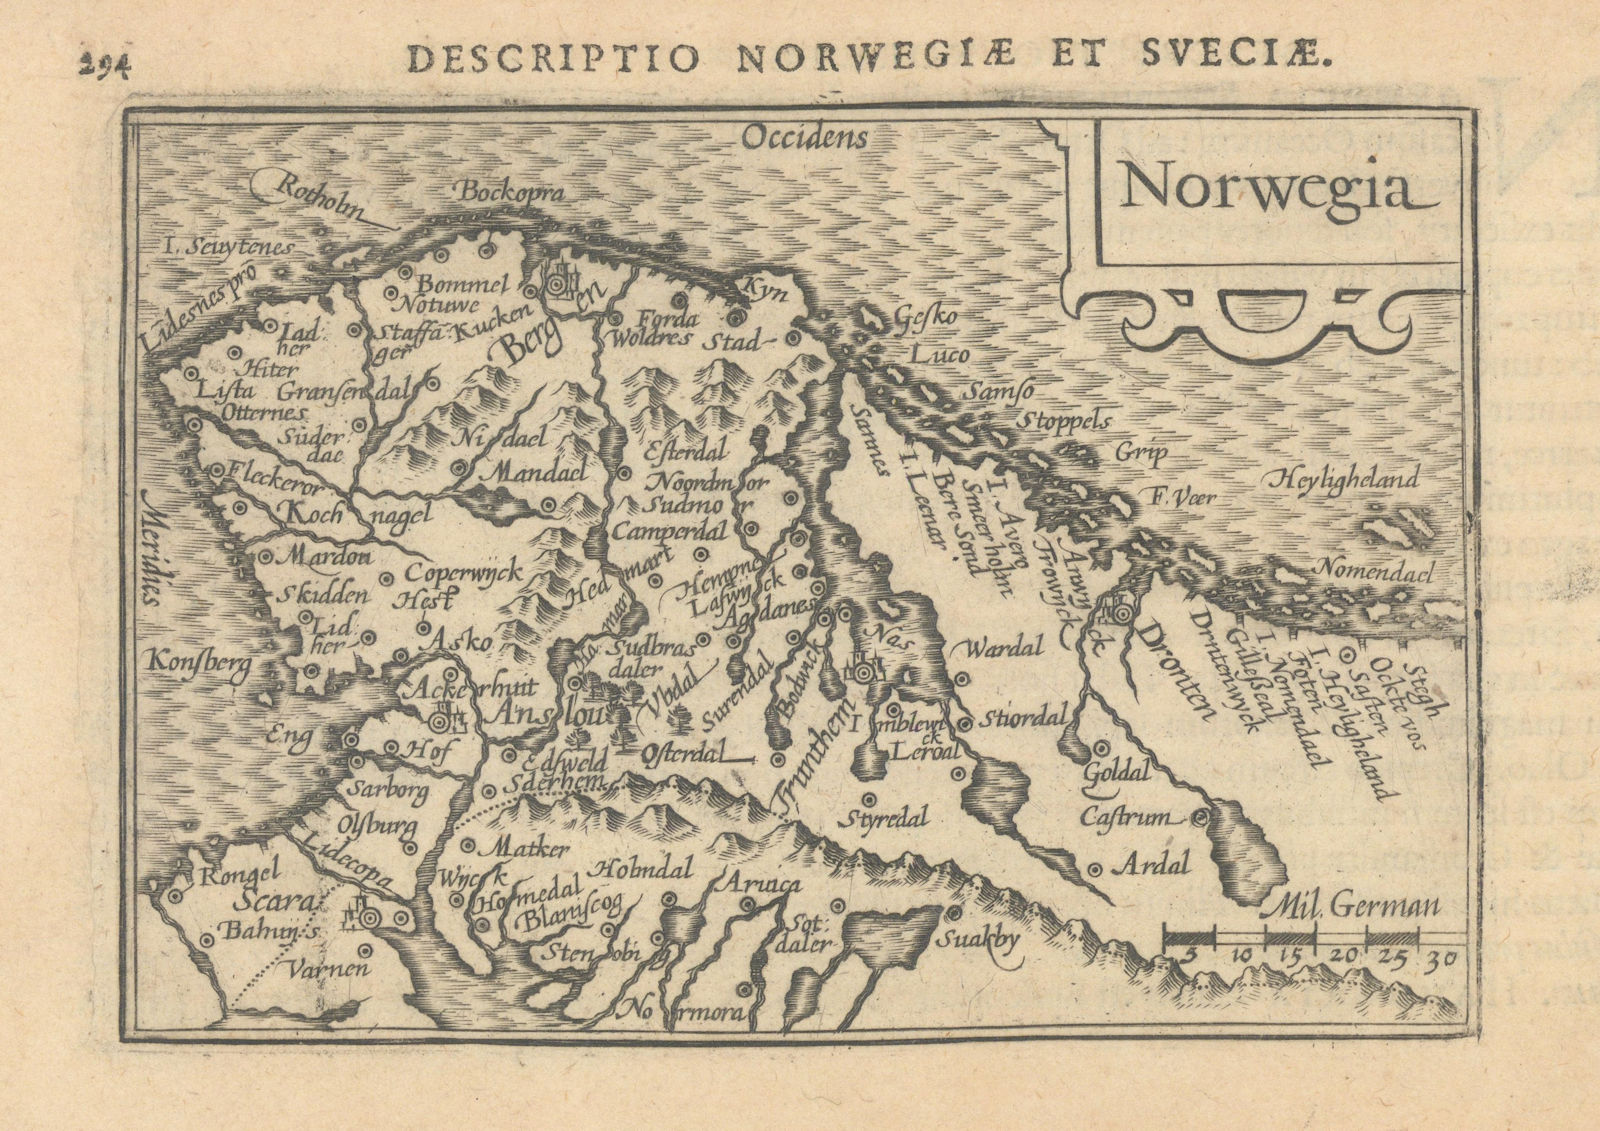 Norwegia by Bertius / Langenes. The first map to show Norway seperately 1603